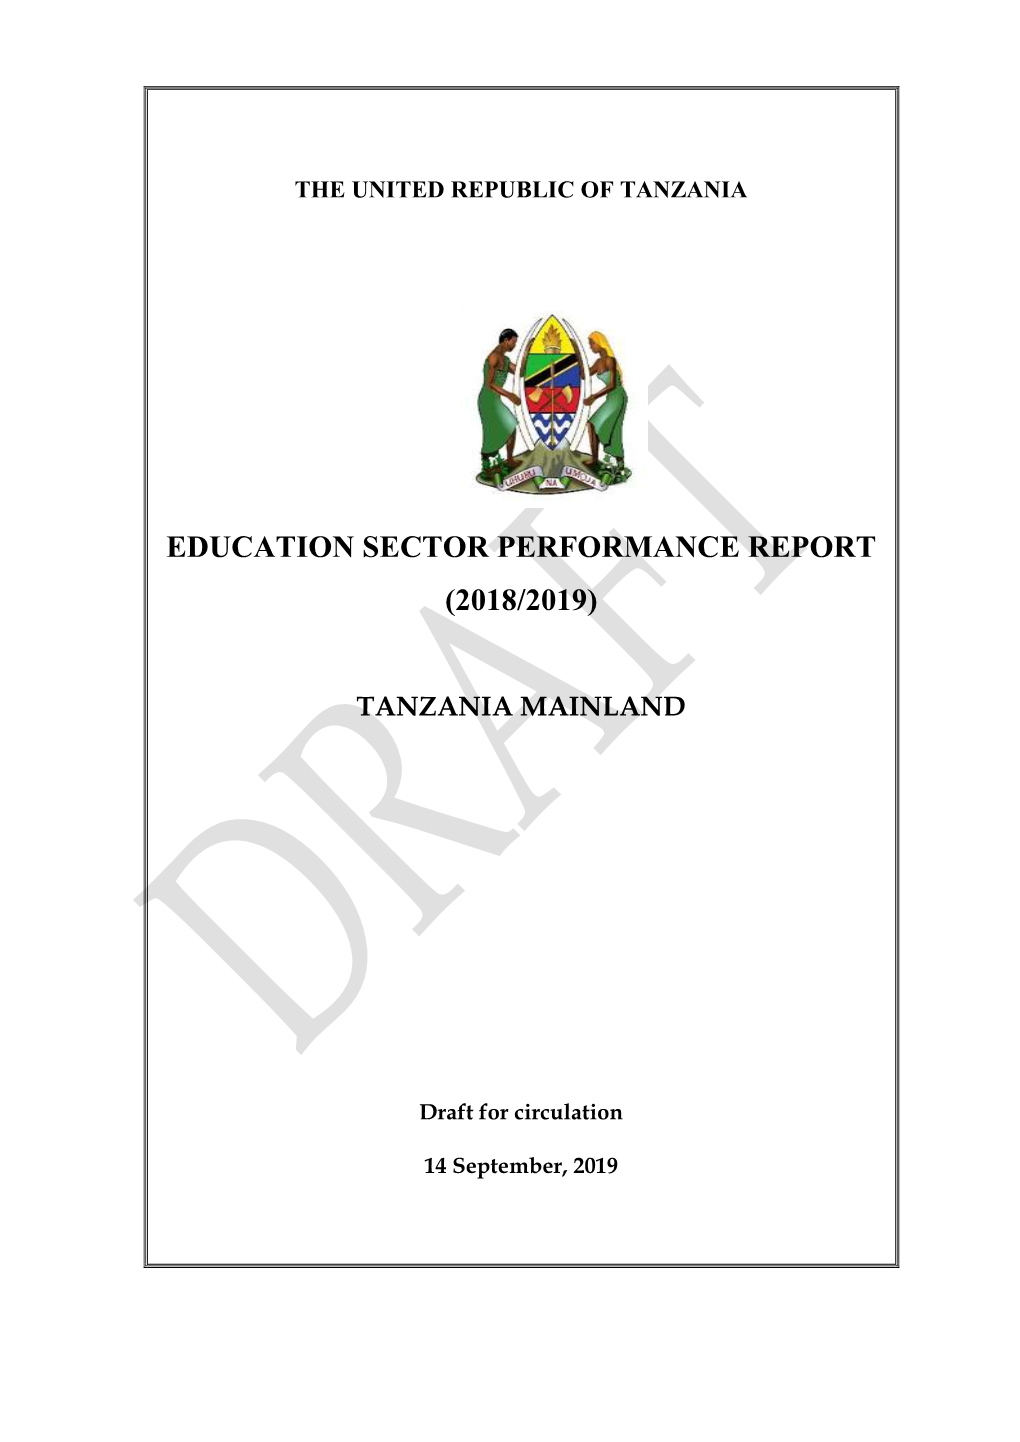 Education Sector Performance Report (2018/2019)